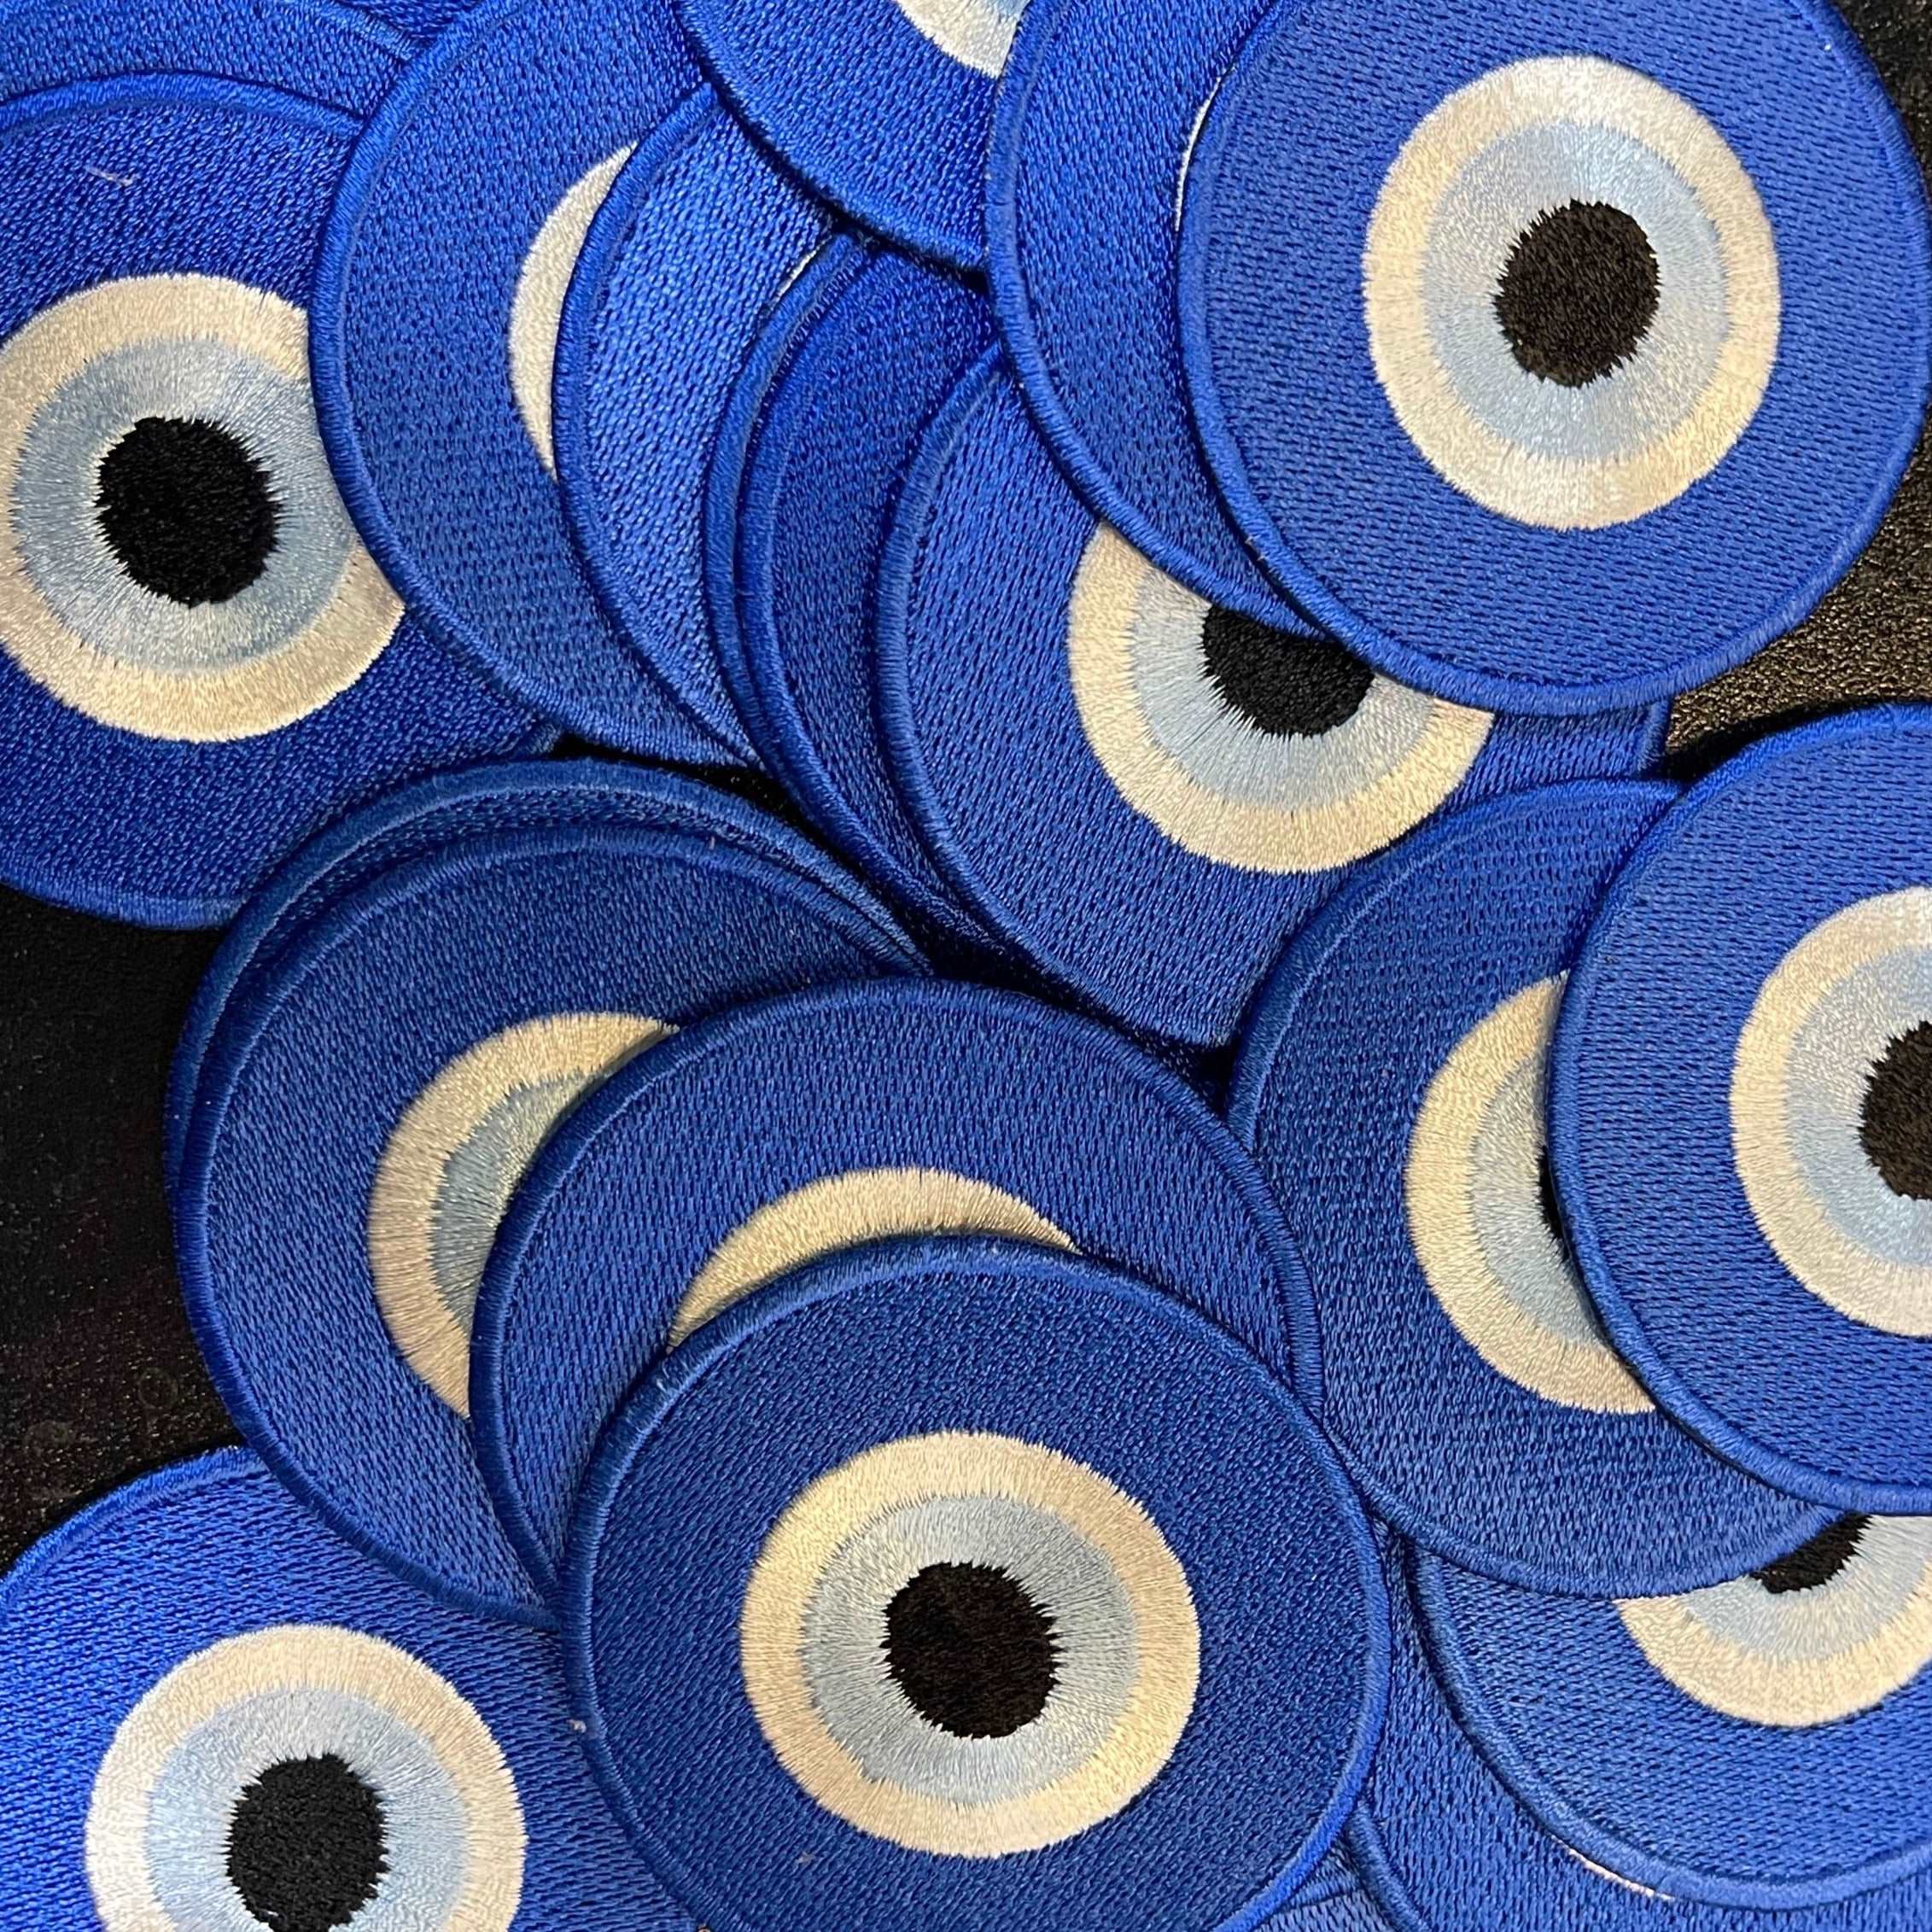 Evil Eye Patch Sticker by These Are Things